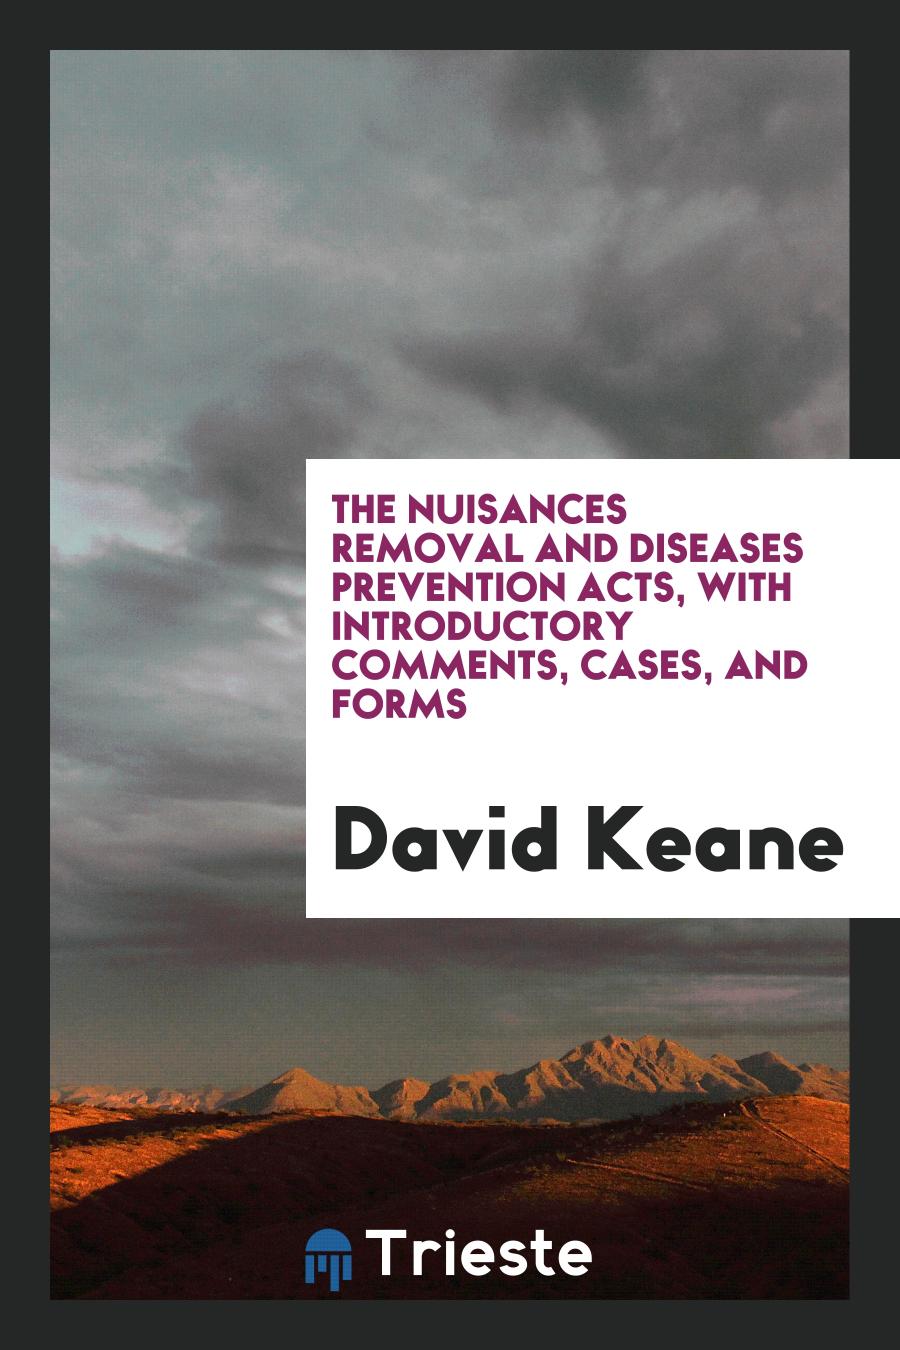 The Nuisances Removal and Diseases Prevention Acts, with Introductory Comments, Cases, and Forms